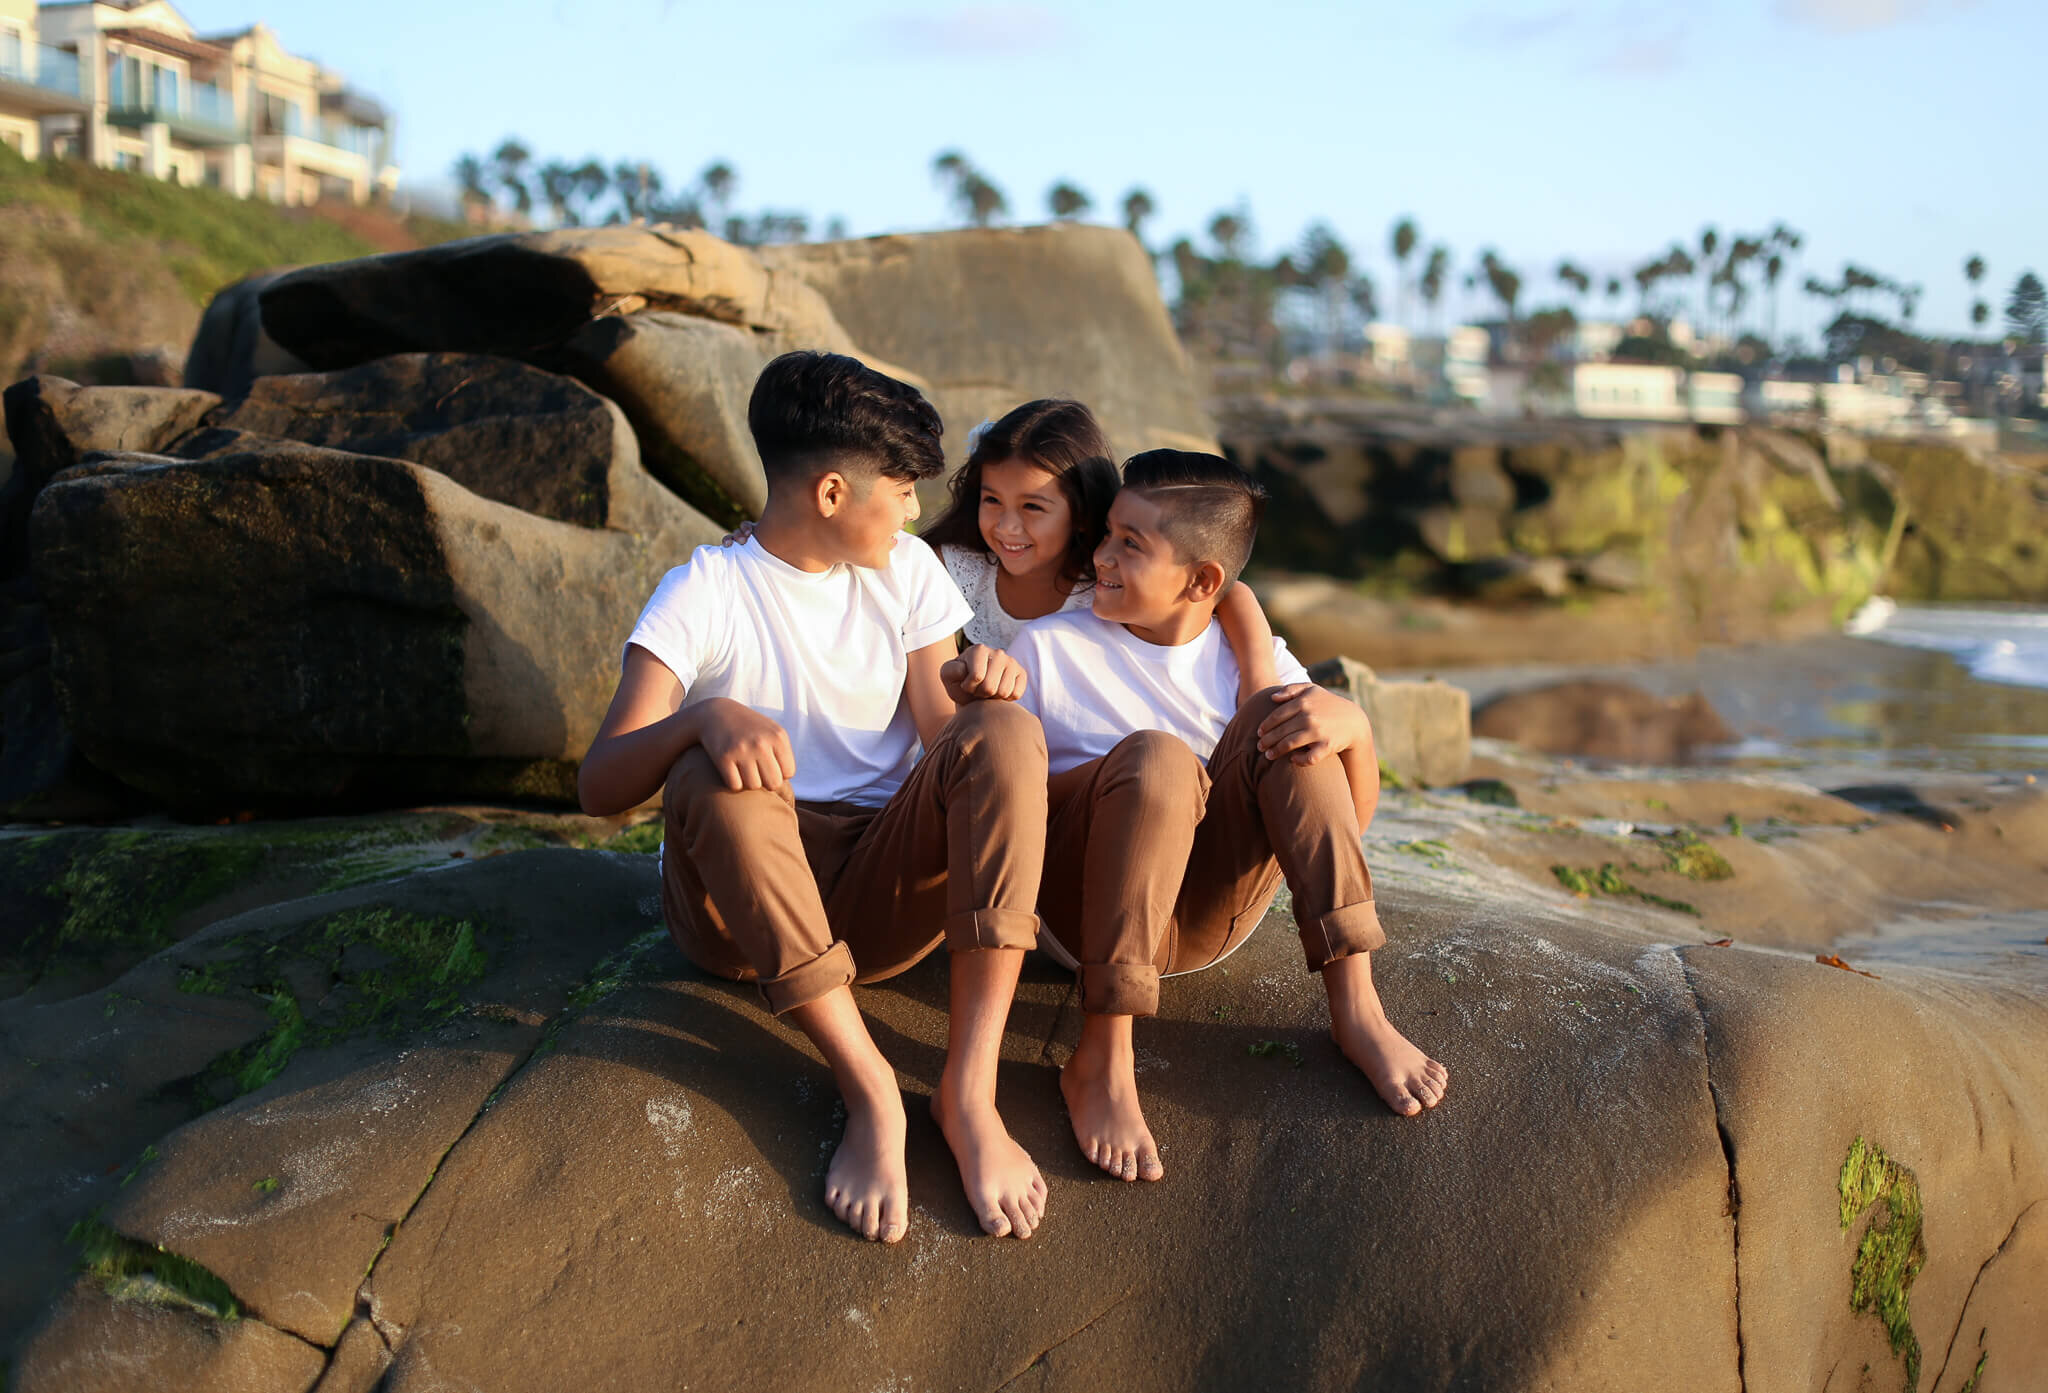  An image of three young siblings sitting in their bare feet close together on some rocks, smiling in the sunshine during family time together outdoors by Photography by L Rose 